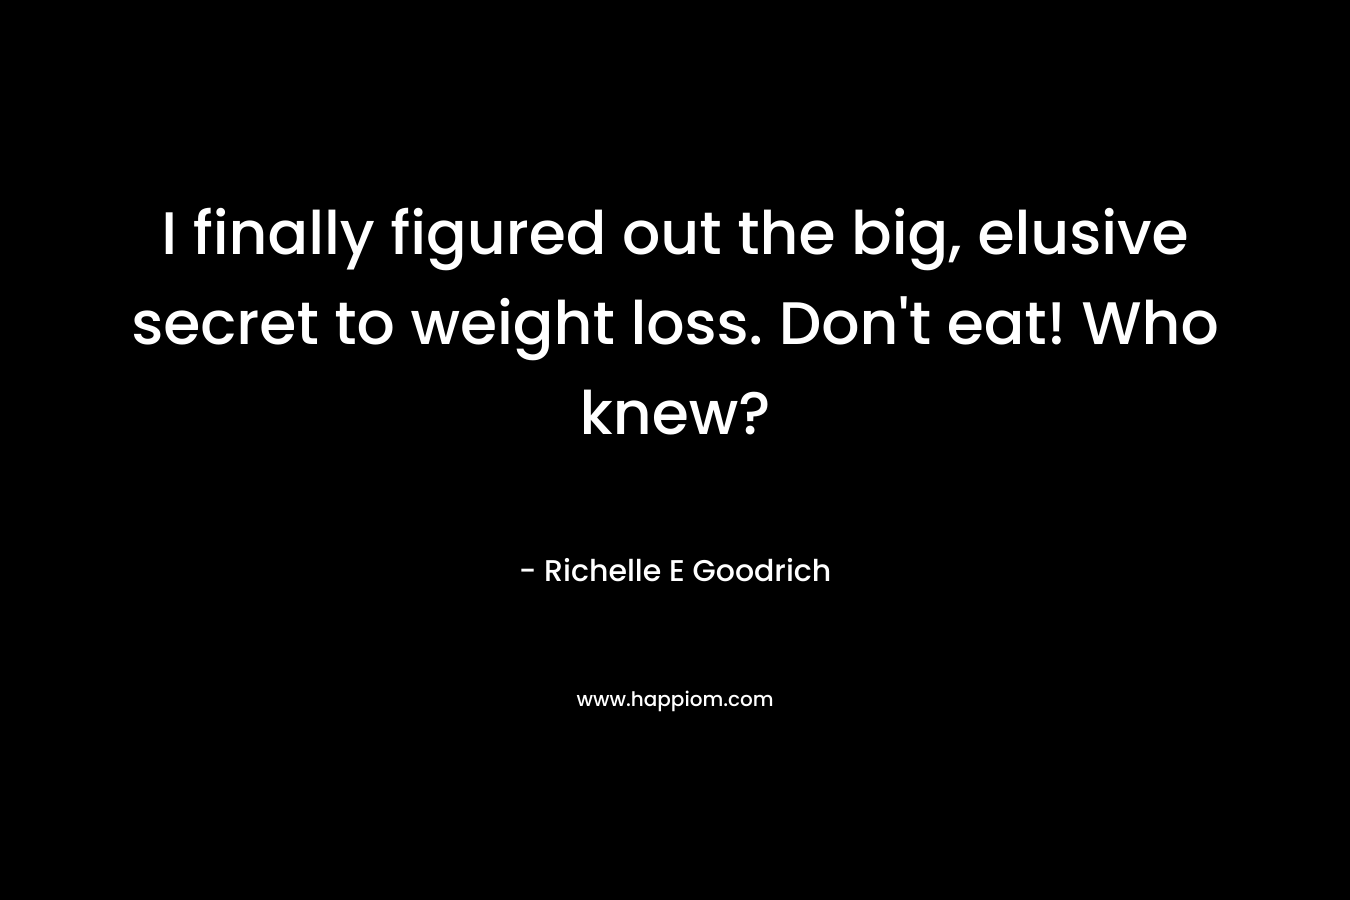 I finally figured out the big, elusive secret to weight loss. Don't eat! Who knew?